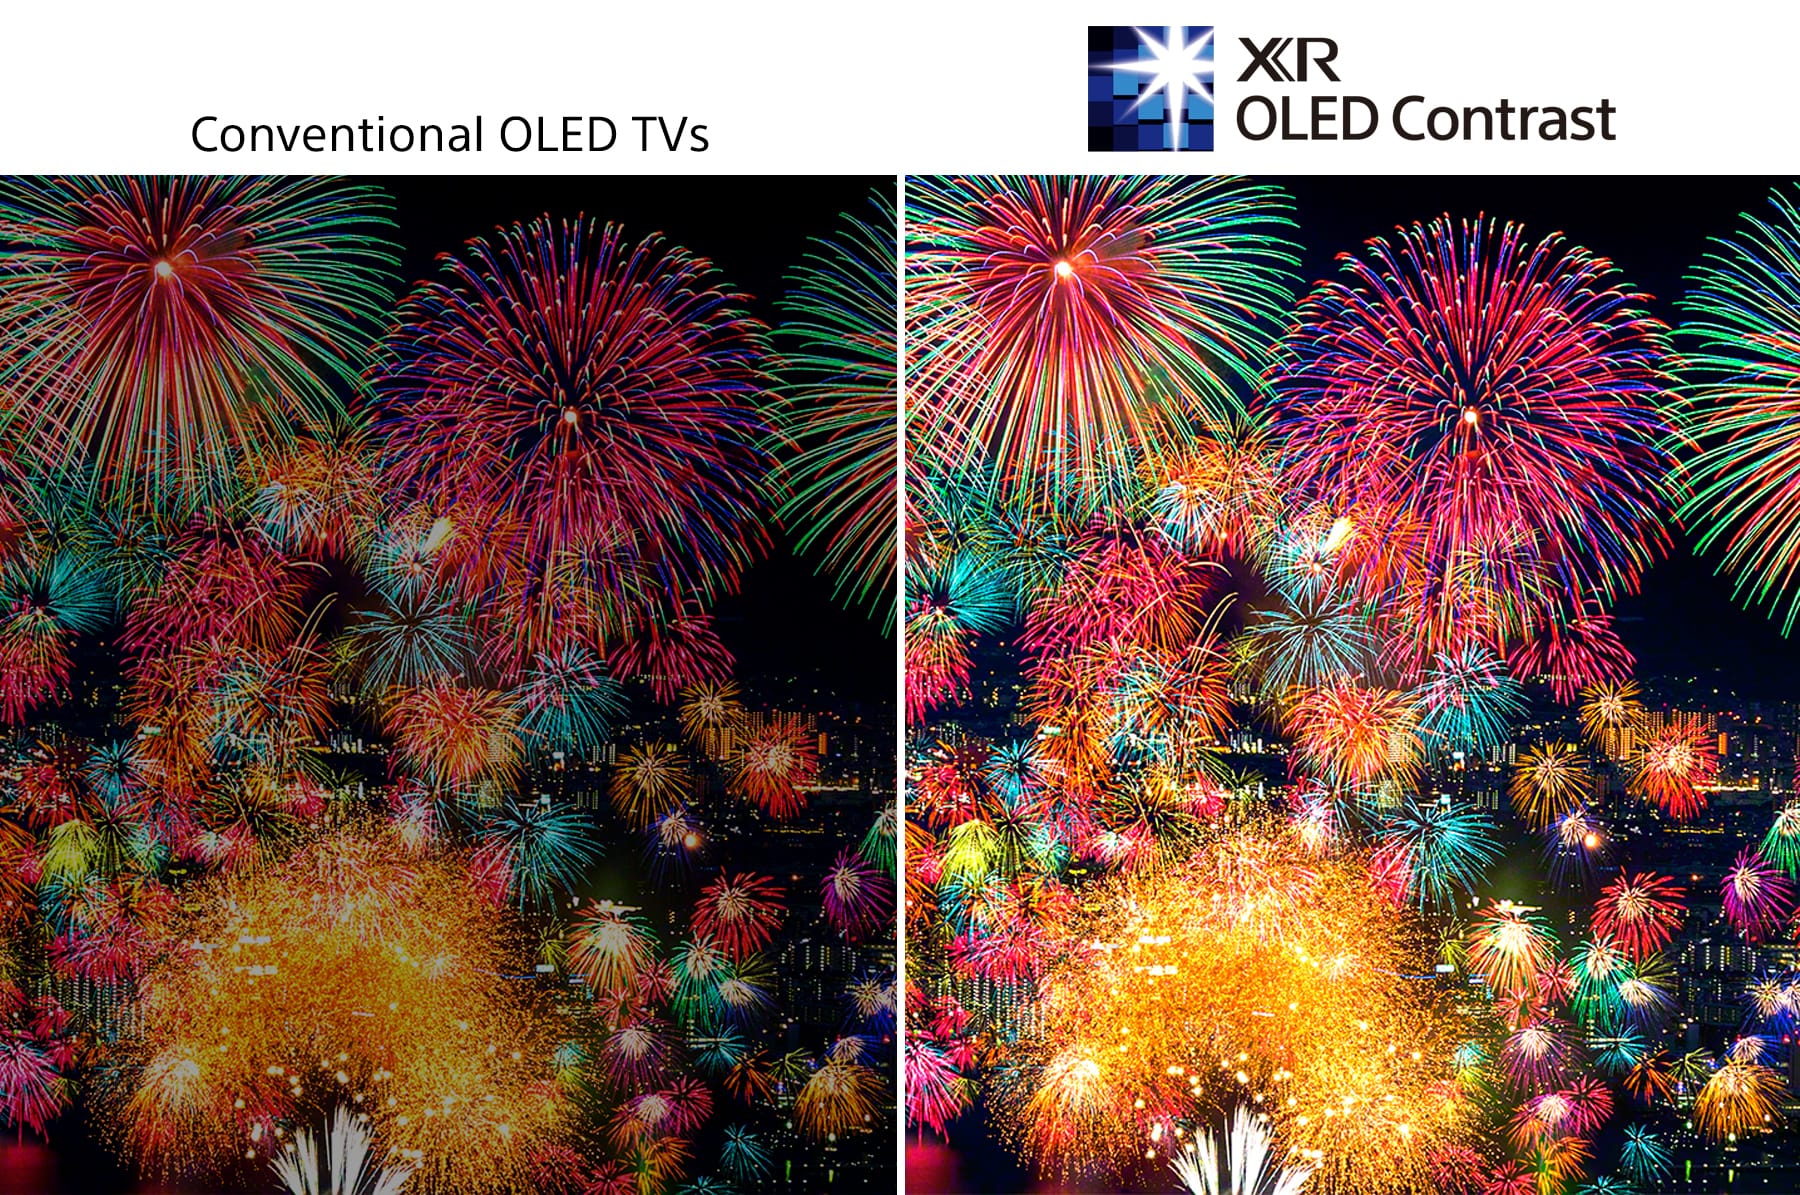 XR OLED CONTRAST